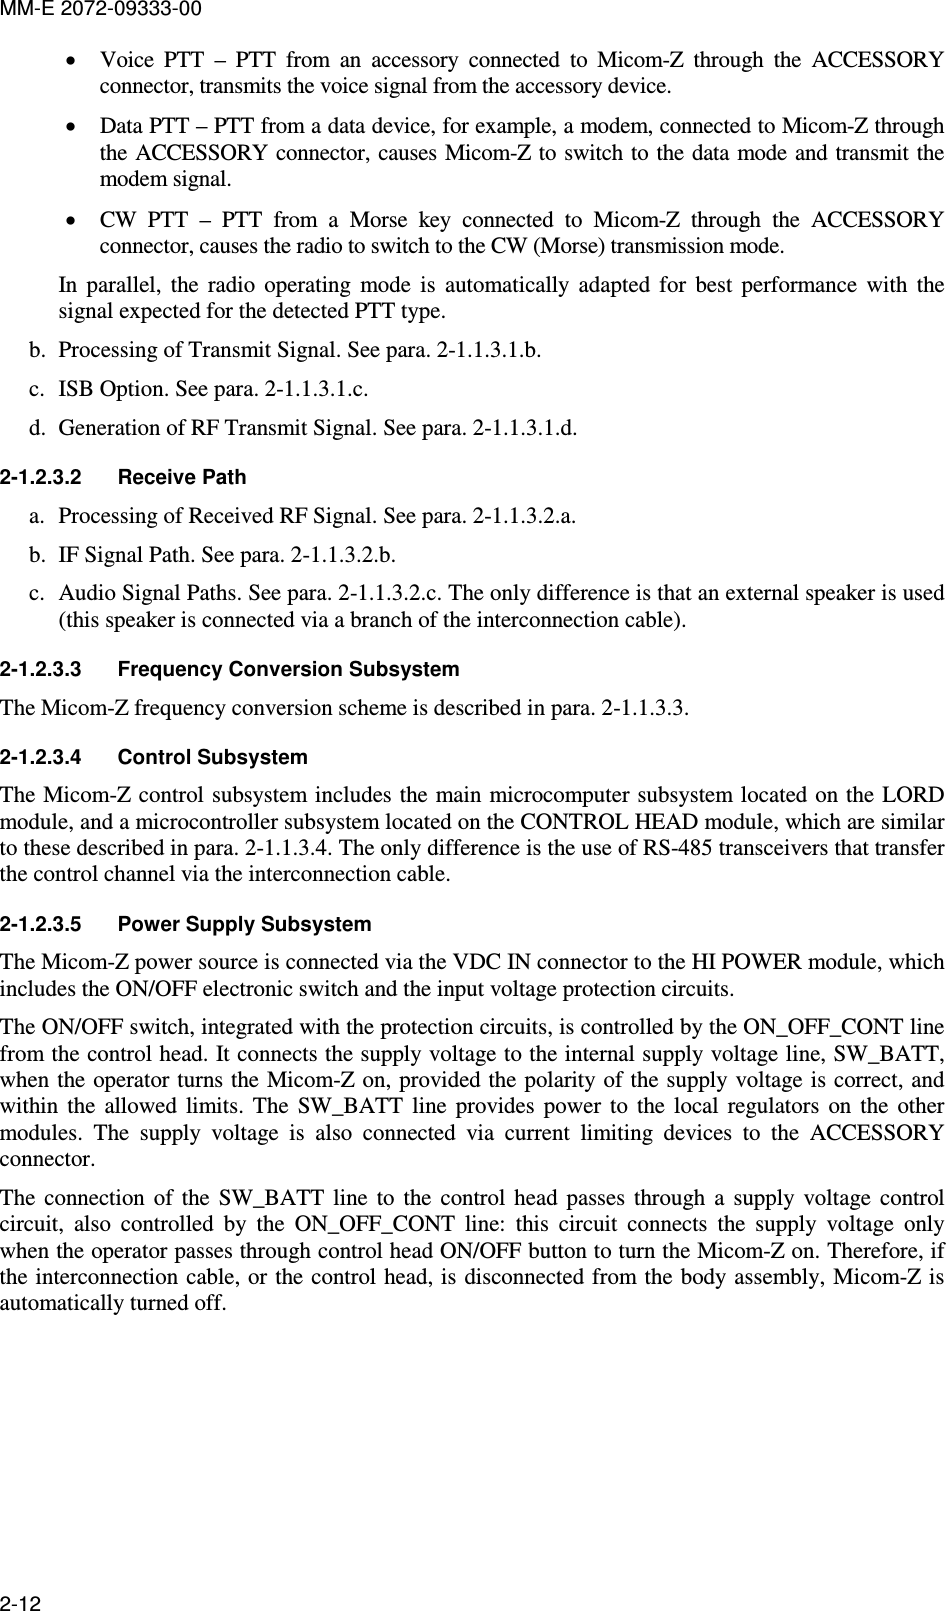 MM-E 2072-09333-00 2-12 • Voice  PTT  –  PTT  from  an  accessory  connected  to  Micom-Z  through  the  ACCESSORY connector, transmits the voice signal from the accessory device. • Data PTT – PTT from a data device, for example, a modem, connected to Micom-Z through the ACCESSORY  connector, causes Micom-Z to switch to the data  mode and transmit the modem signal. • CW  PTT  –  PTT  from  a  Morse  key  connected  to  Micom-Z  through  the  ACCESSORY connector, causes the radio to switch to the CW (Morse) transmission mode. In  parallel,  the  radio  operating  mode  is  automatically  adapted  for  best  performance  with  the signal expected for the detected PTT type. b. Processing of Transmit Signal. See para.  2-1.1.3.1.b. c. ISB Option. See para.  2-1.1.3.1.c. d. Generation of RF Transmit Signal. See para.  2-1.1.3.1.d. 2-1.2.3.2  Receive Path a. Processing of Received RF Signal. See para.  2-1.1.3.2.a. b. IF Signal Path. See para.  2-1.1.3.2.b. c. Audio Signal Paths. See para.  2-1.1.3.2.c. The only difference is that an external speaker is used (this speaker is connected via a branch of the interconnection cable). 2-1.2.3.3  Frequency Conversion Subsystem  The Micom-Z frequency conversion scheme is described in para.  2-1.1.3.3. 2-1.2.3.4  Control Subsystem The Micom-Z control subsystem includes the main microcomputer subsystem located on the LORD module, and a microcontroller subsystem located on the CONTROL HEAD module, which are similar to these described in para.  2-1.1.3.4. The only difference is the use of RS-485 transceivers that transfer the control channel via the interconnection cable. 2-1.2.3.5  Power Supply Subsystem The Micom-Z power source is connected via the VDC IN connector to the HI POWER module, which includes the ON/OFF electronic switch and the input voltage protection circuits. The ON/OFF switch, integrated with the protection circuits, is controlled by the ON_OFF_CONT line from the control head. It connects the supply voltage to the internal supply voltage line, SW_BATT, when the operator turns the Micom-Z on, provided the polarity of the supply voltage is correct, and within  the  allowed  limits.  The  SW_BATT  line  provides  power  to  the  local  regulators  on  the  other modules.  The  supply  voltage  is  also  connected  via  current  limiting  devices  to  the  ACCESSORY connector.  The  connection  of  the  SW_BATT  line  to  the  control  head  passes  through  a  supply  voltage  control circuit,  also  controlled  by  the  ON_OFF_CONT  line:  this  circuit  connects  the  supply  voltage  only when the operator passes through control head ON/OFF button to turn the Micom-Z on. Therefore, if the interconnection cable, or the control head, is disconnected from the body assembly, Micom-Z is automatically turned off. 